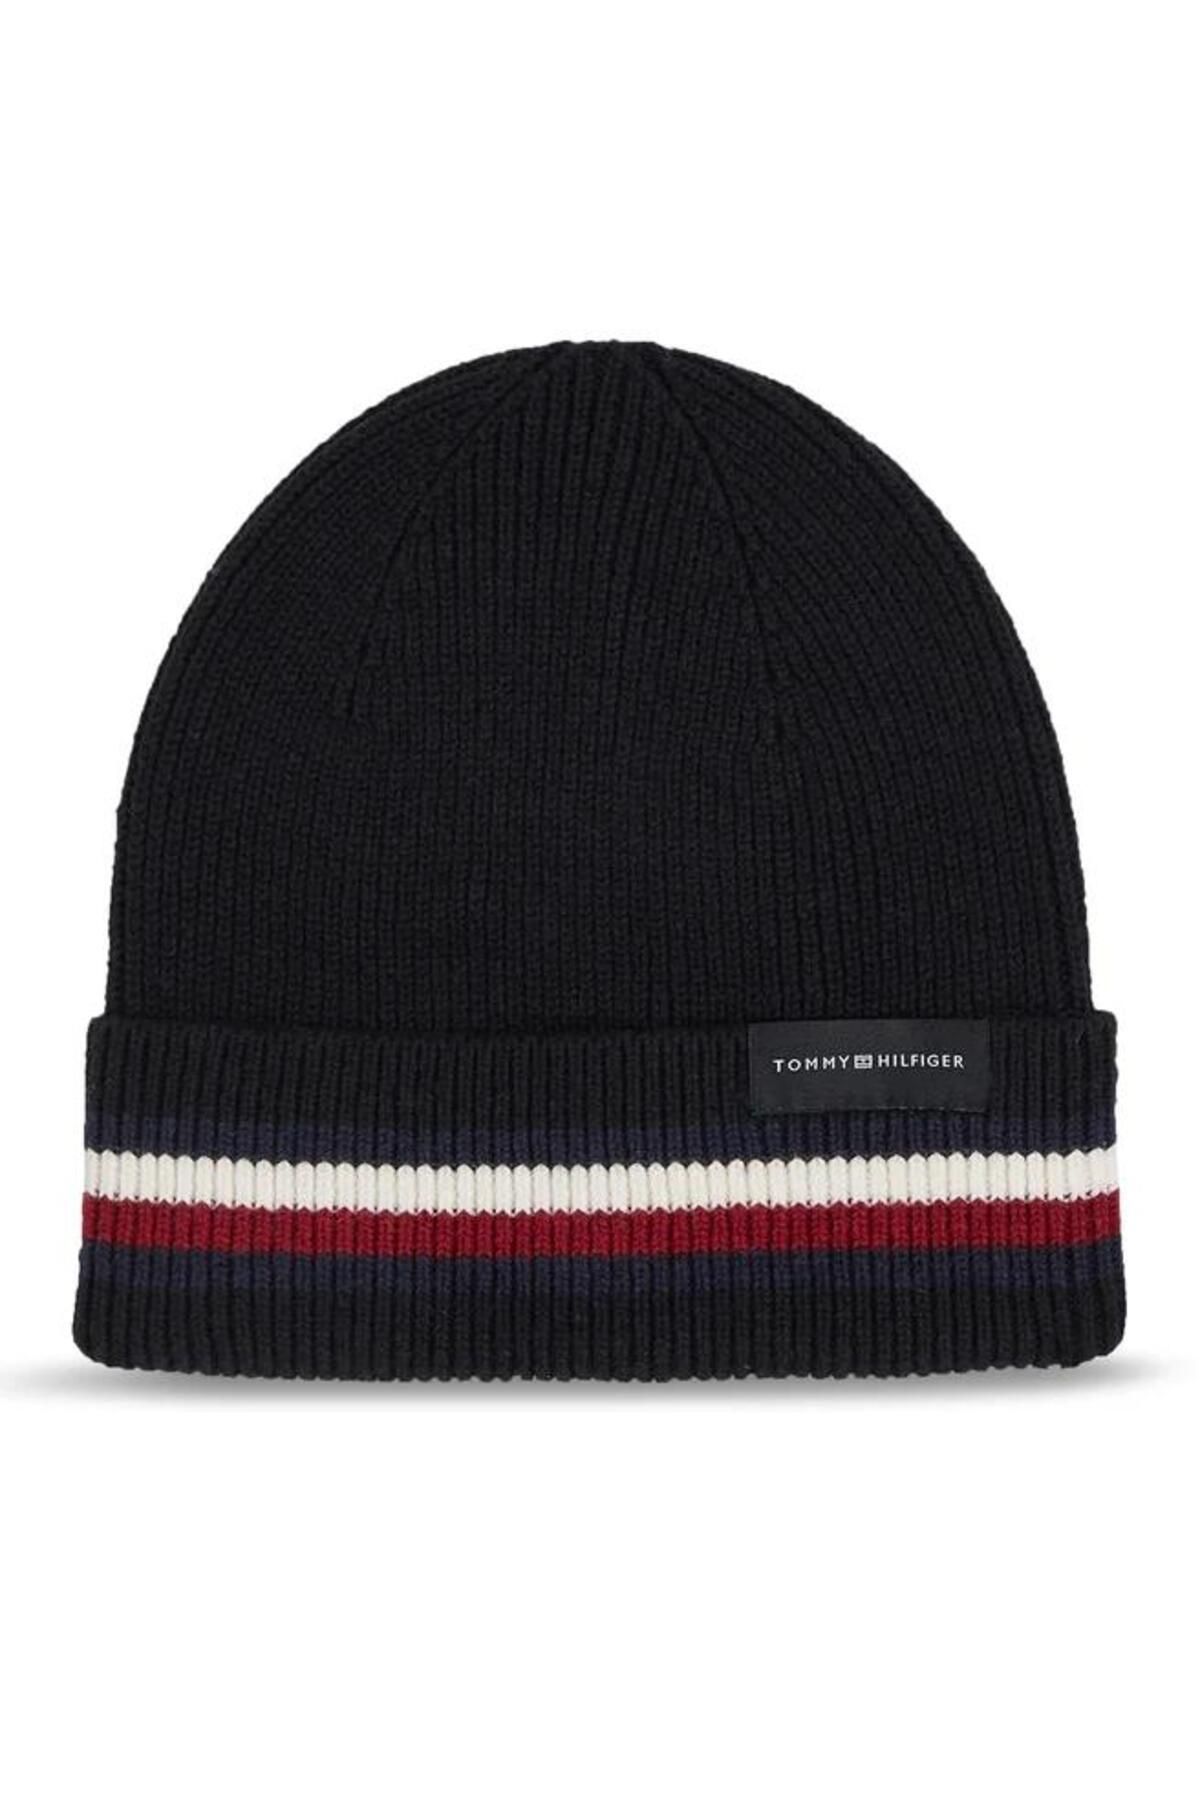 Tommy Hilfiger CORPORATE BEANIE